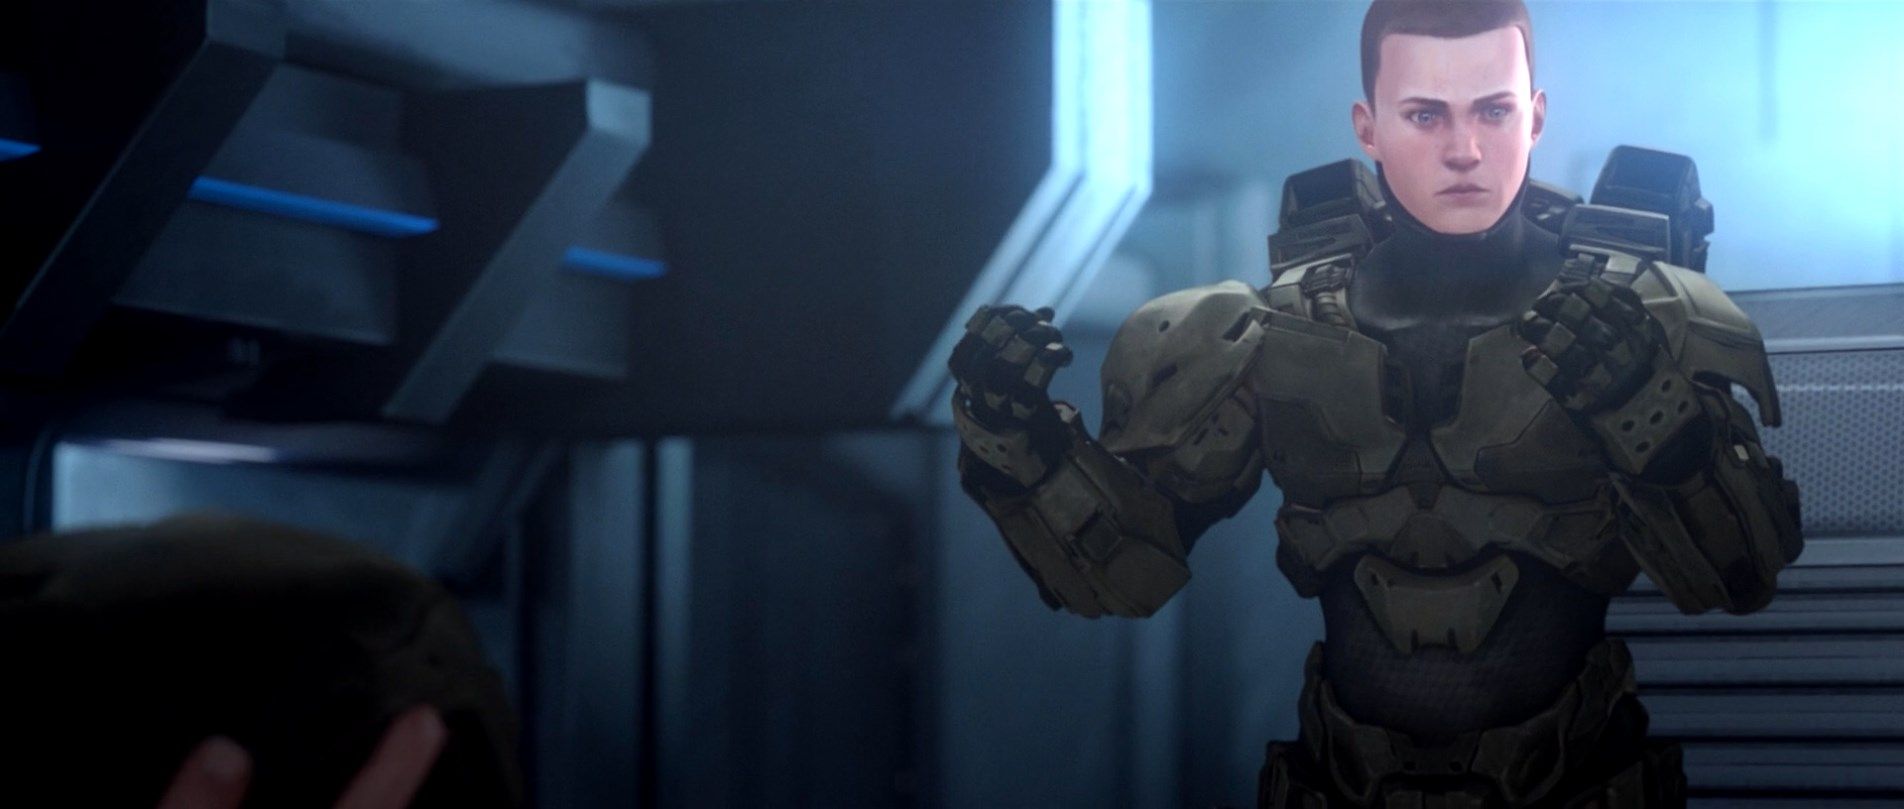 25 Weird Facts About The Master Chief That Only Fans Will Know